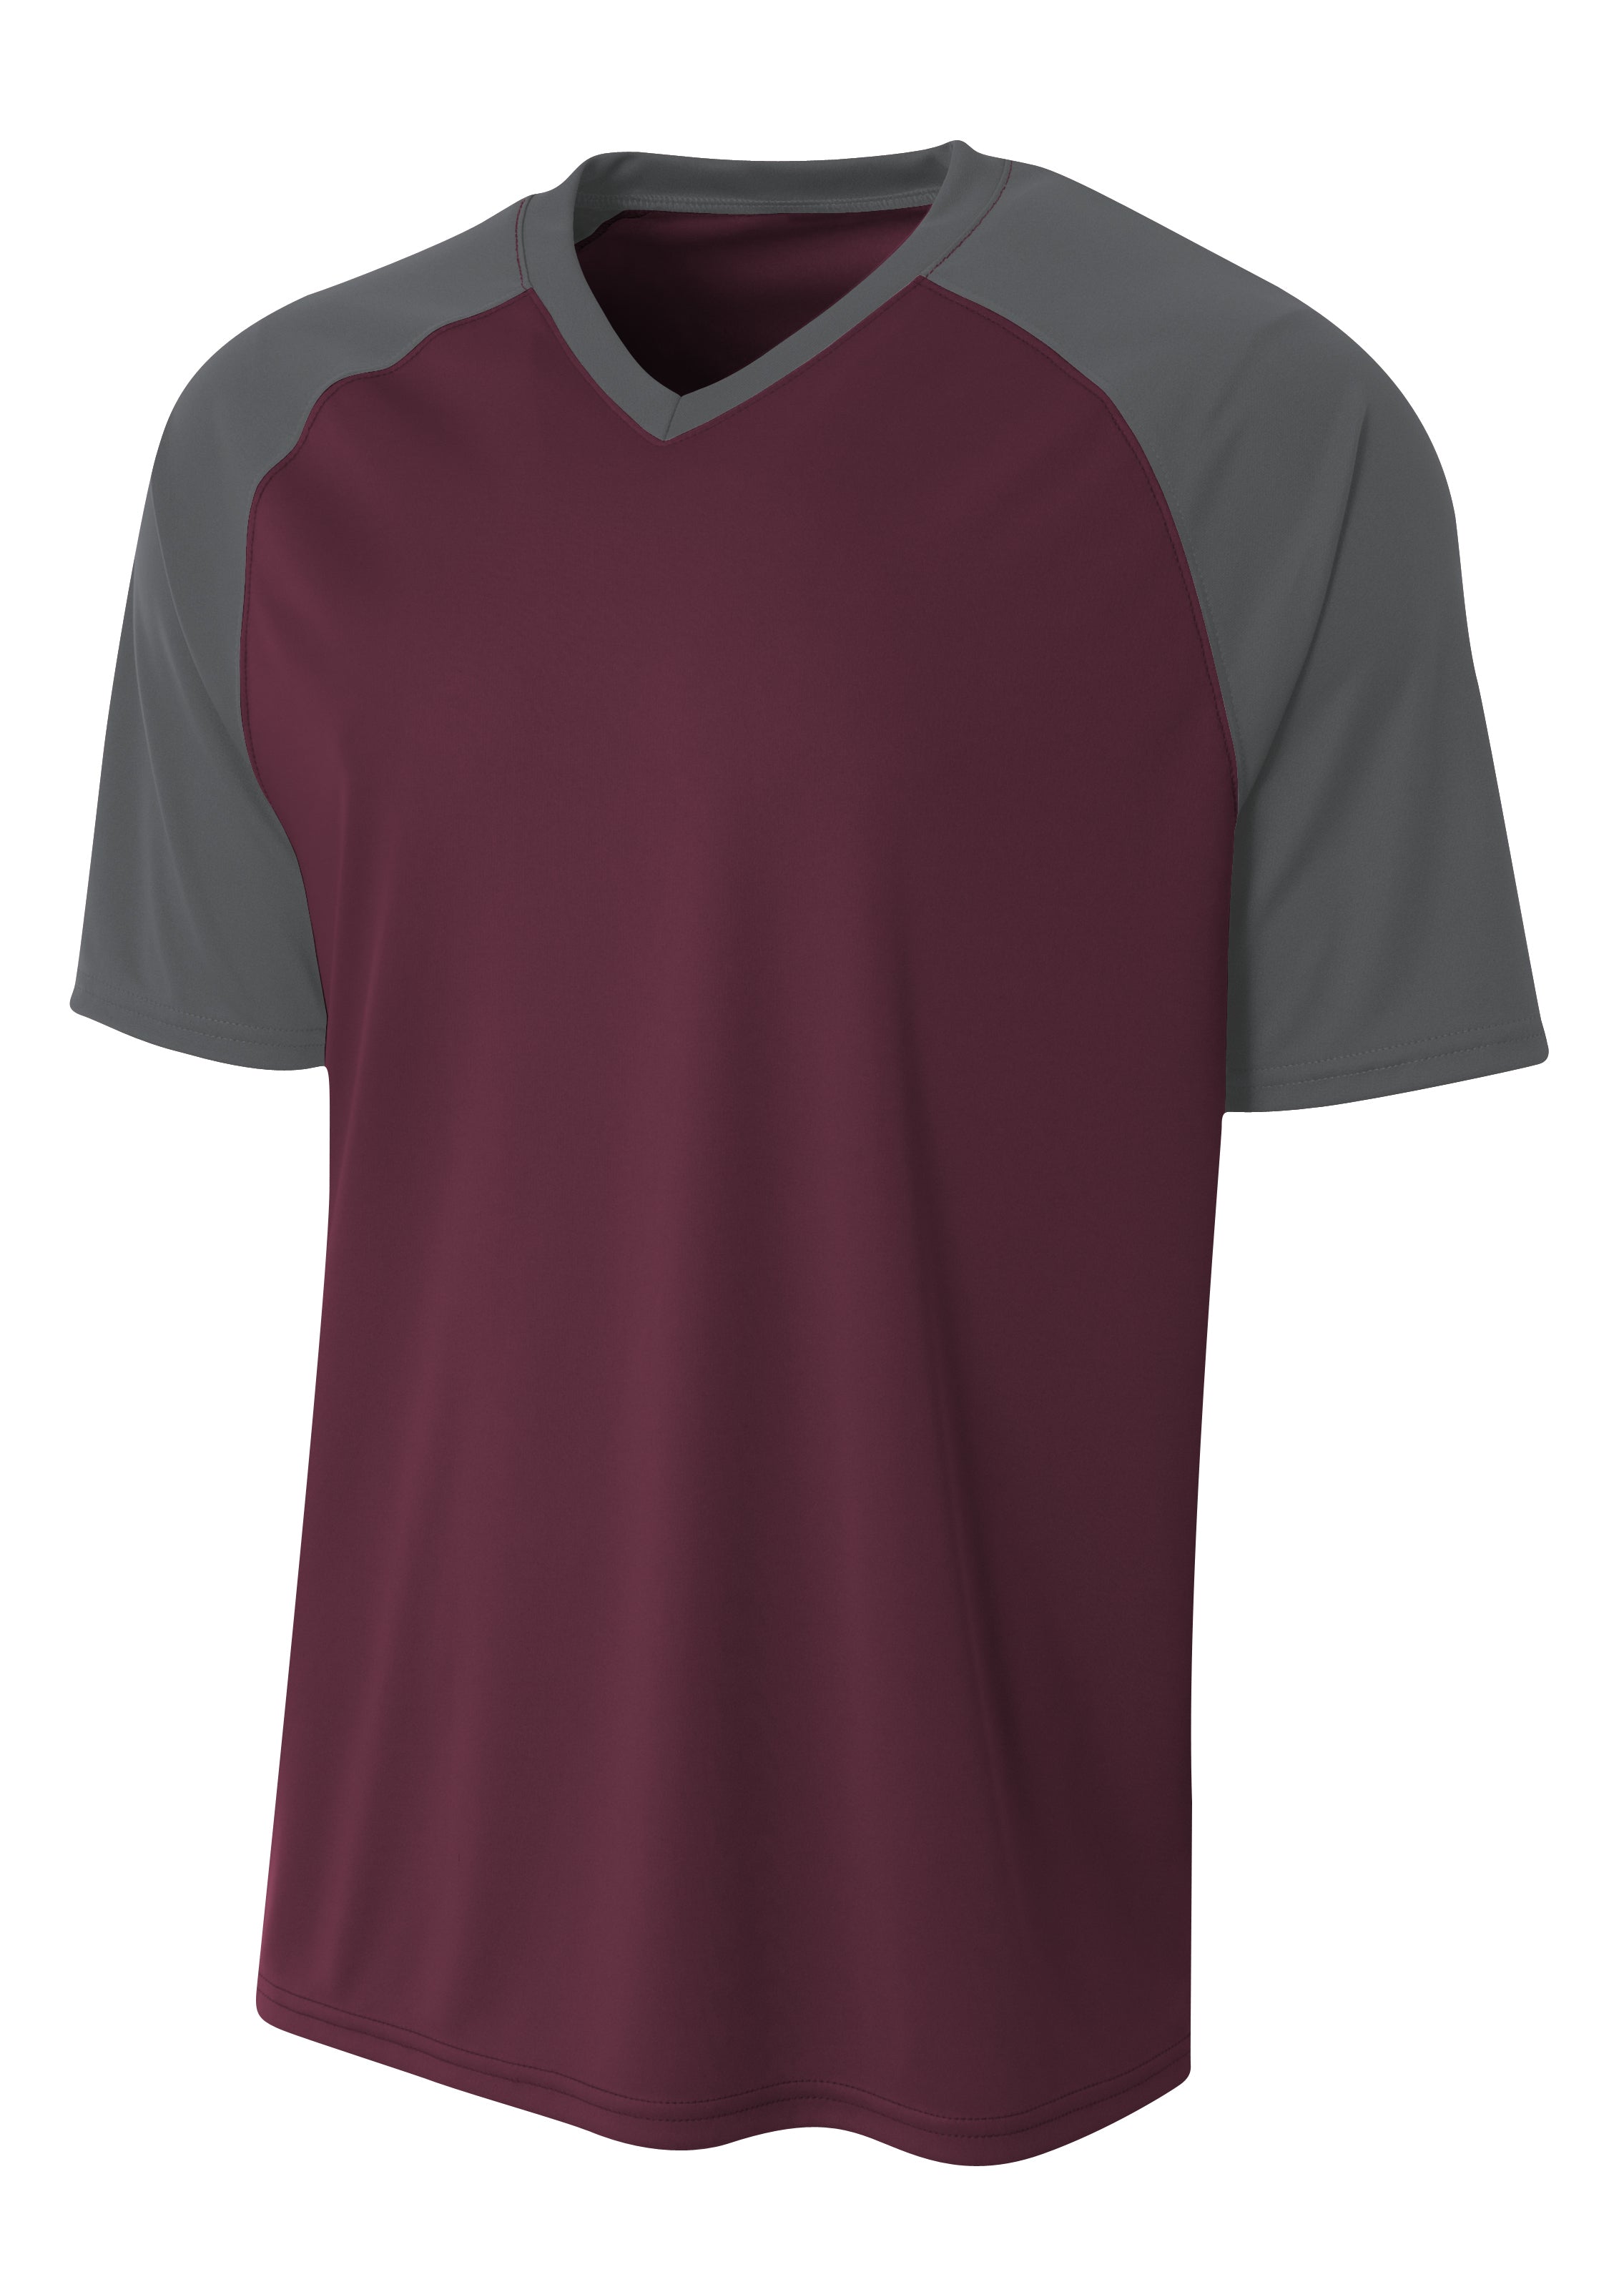 A4 Strike Youth Soccer Jersey - Youth Sports Products